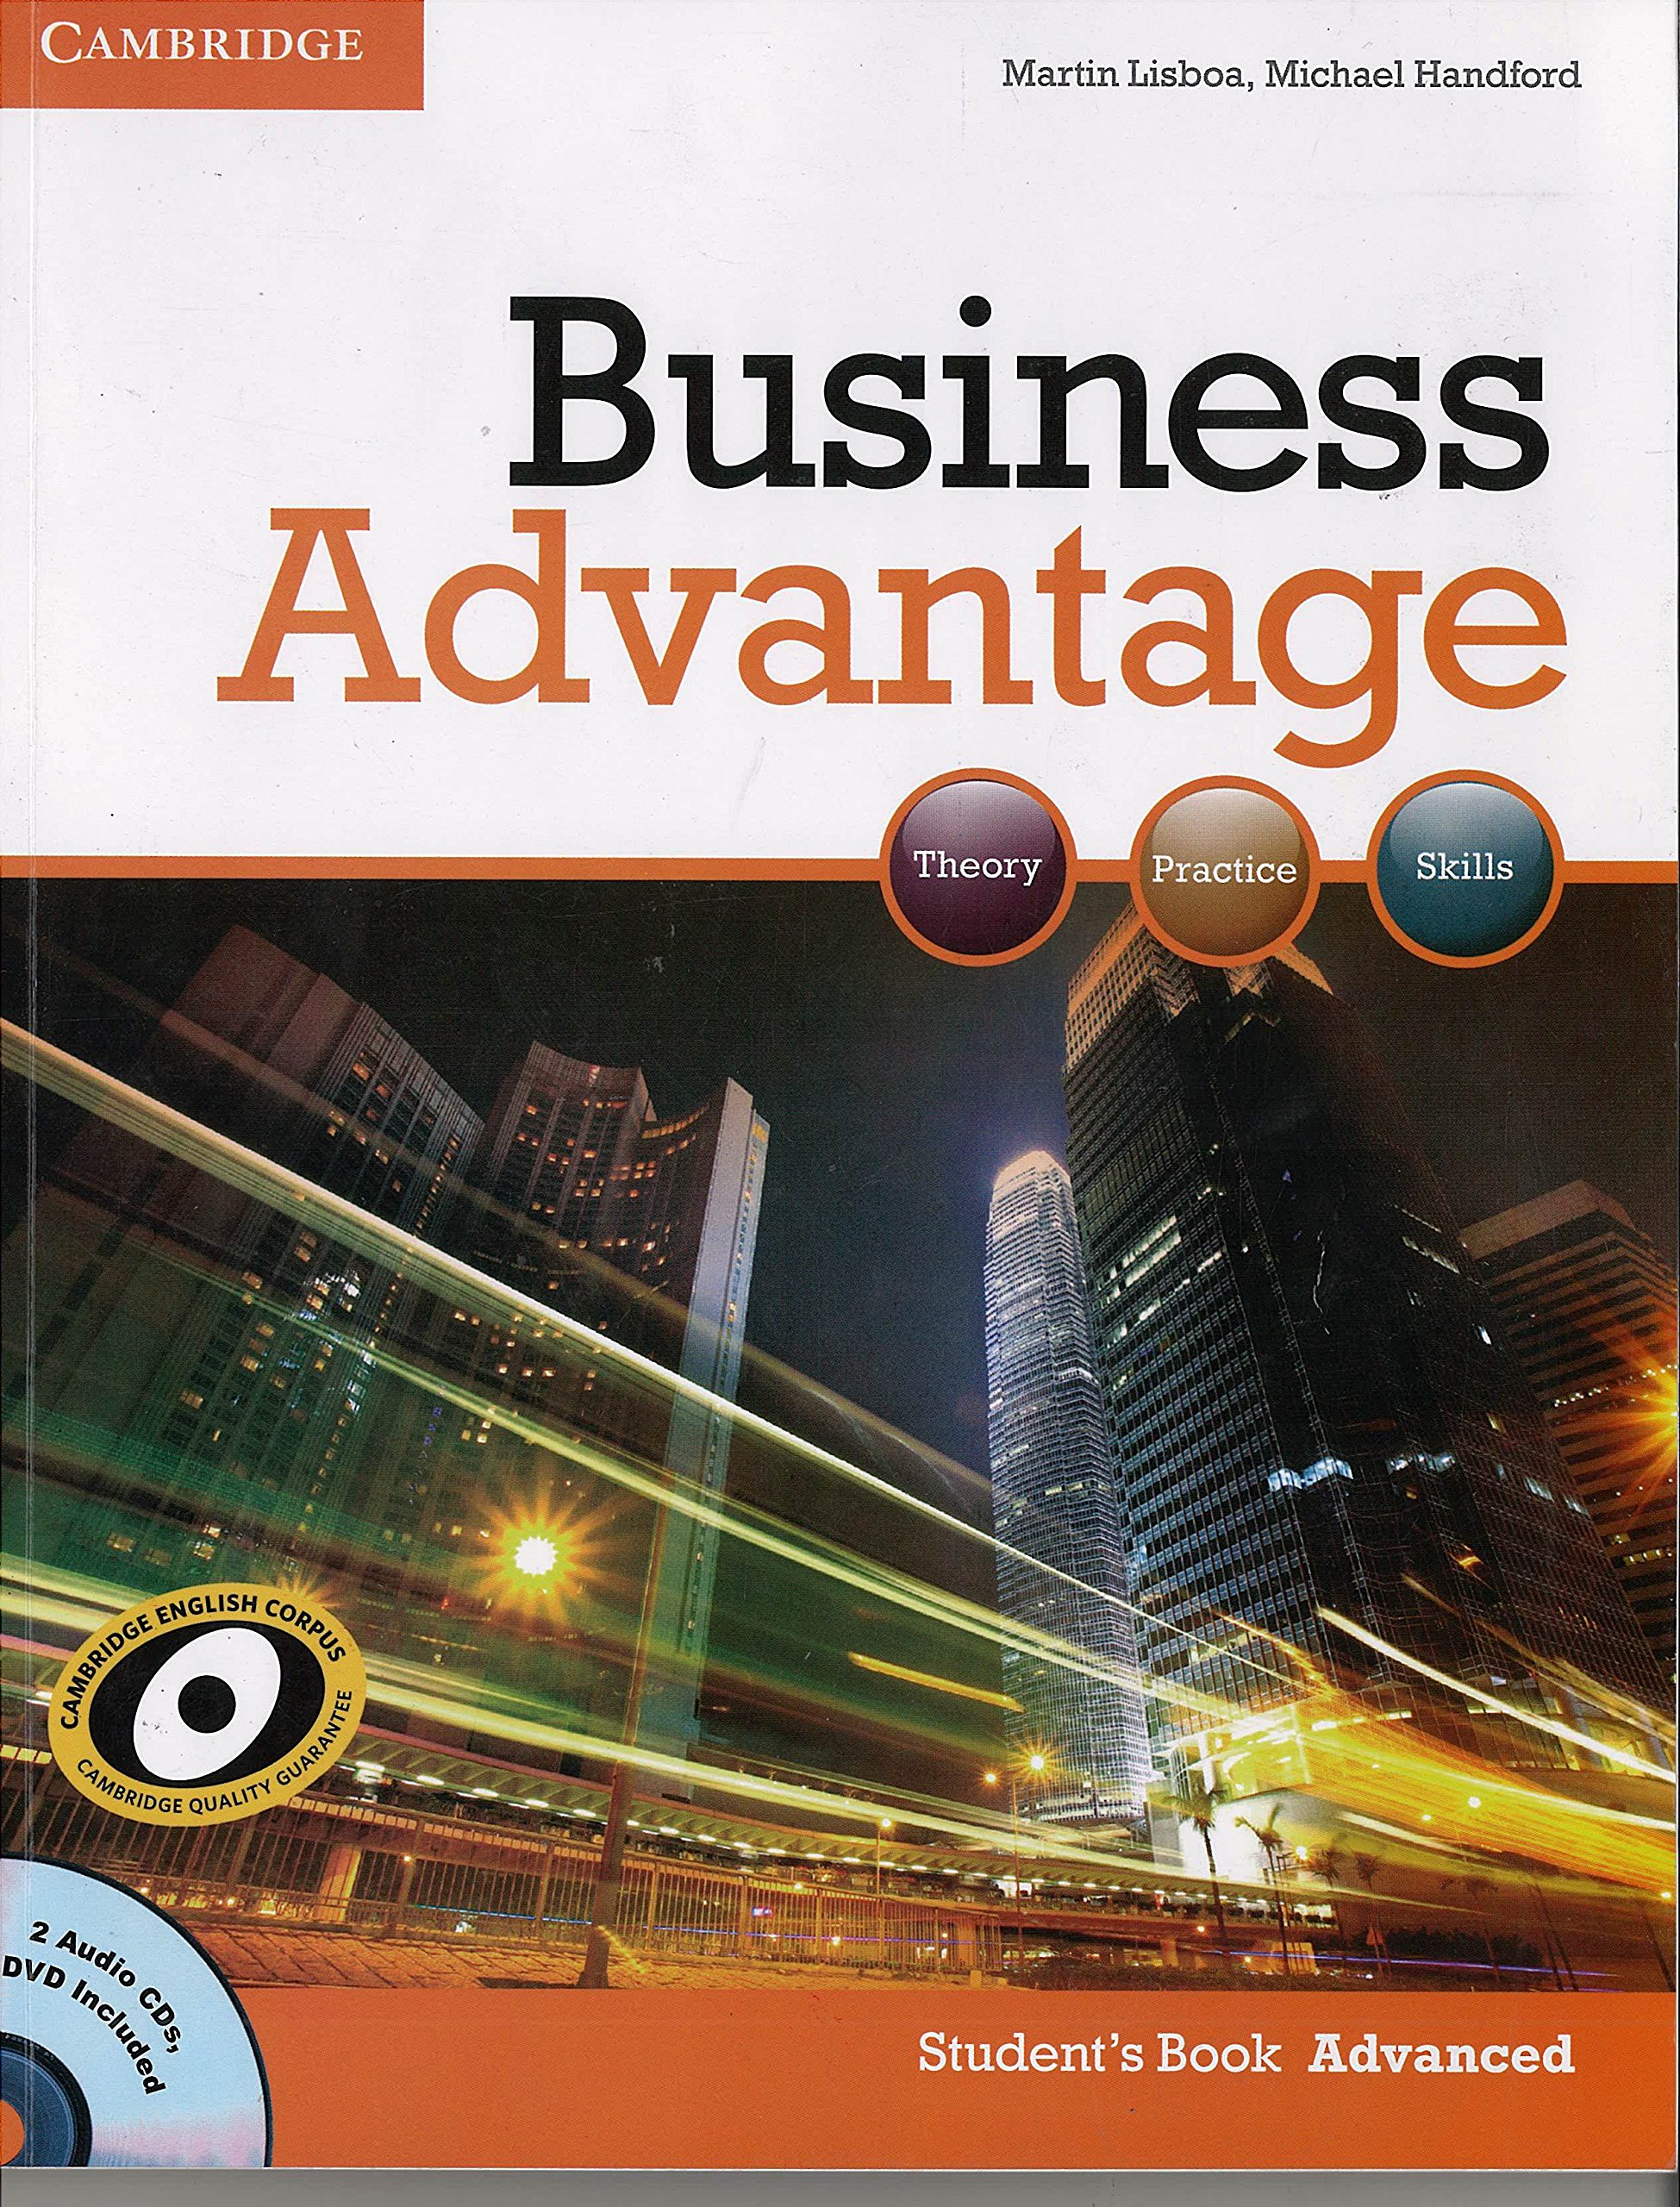 Business Advantage: Theory, Practice, Skills - Students Book Advanced